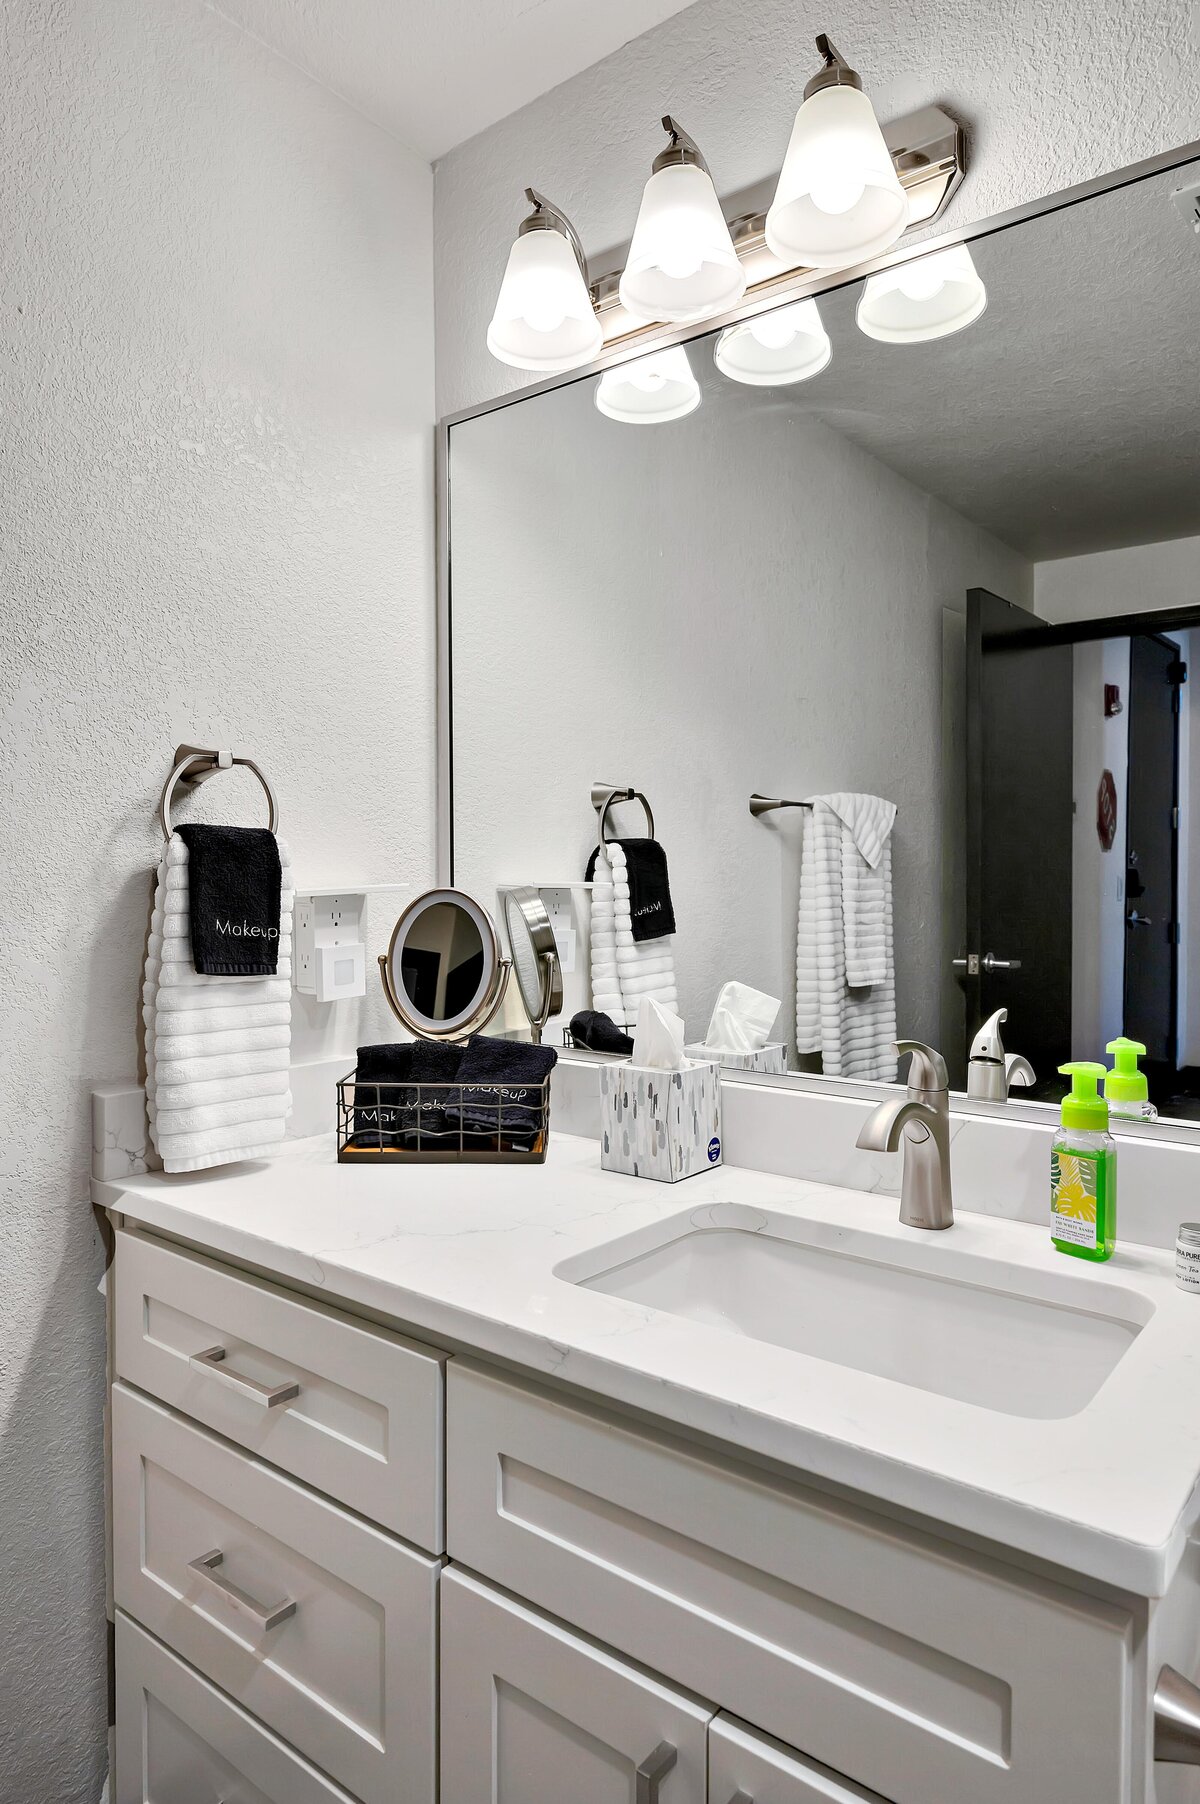 Bathroom vanity with large mirror in this one-bedroom, one-bathroom vintage industrial condo with Smart TV, free Wi-Fi, and washer/dryer located in downtown Waco, TX.